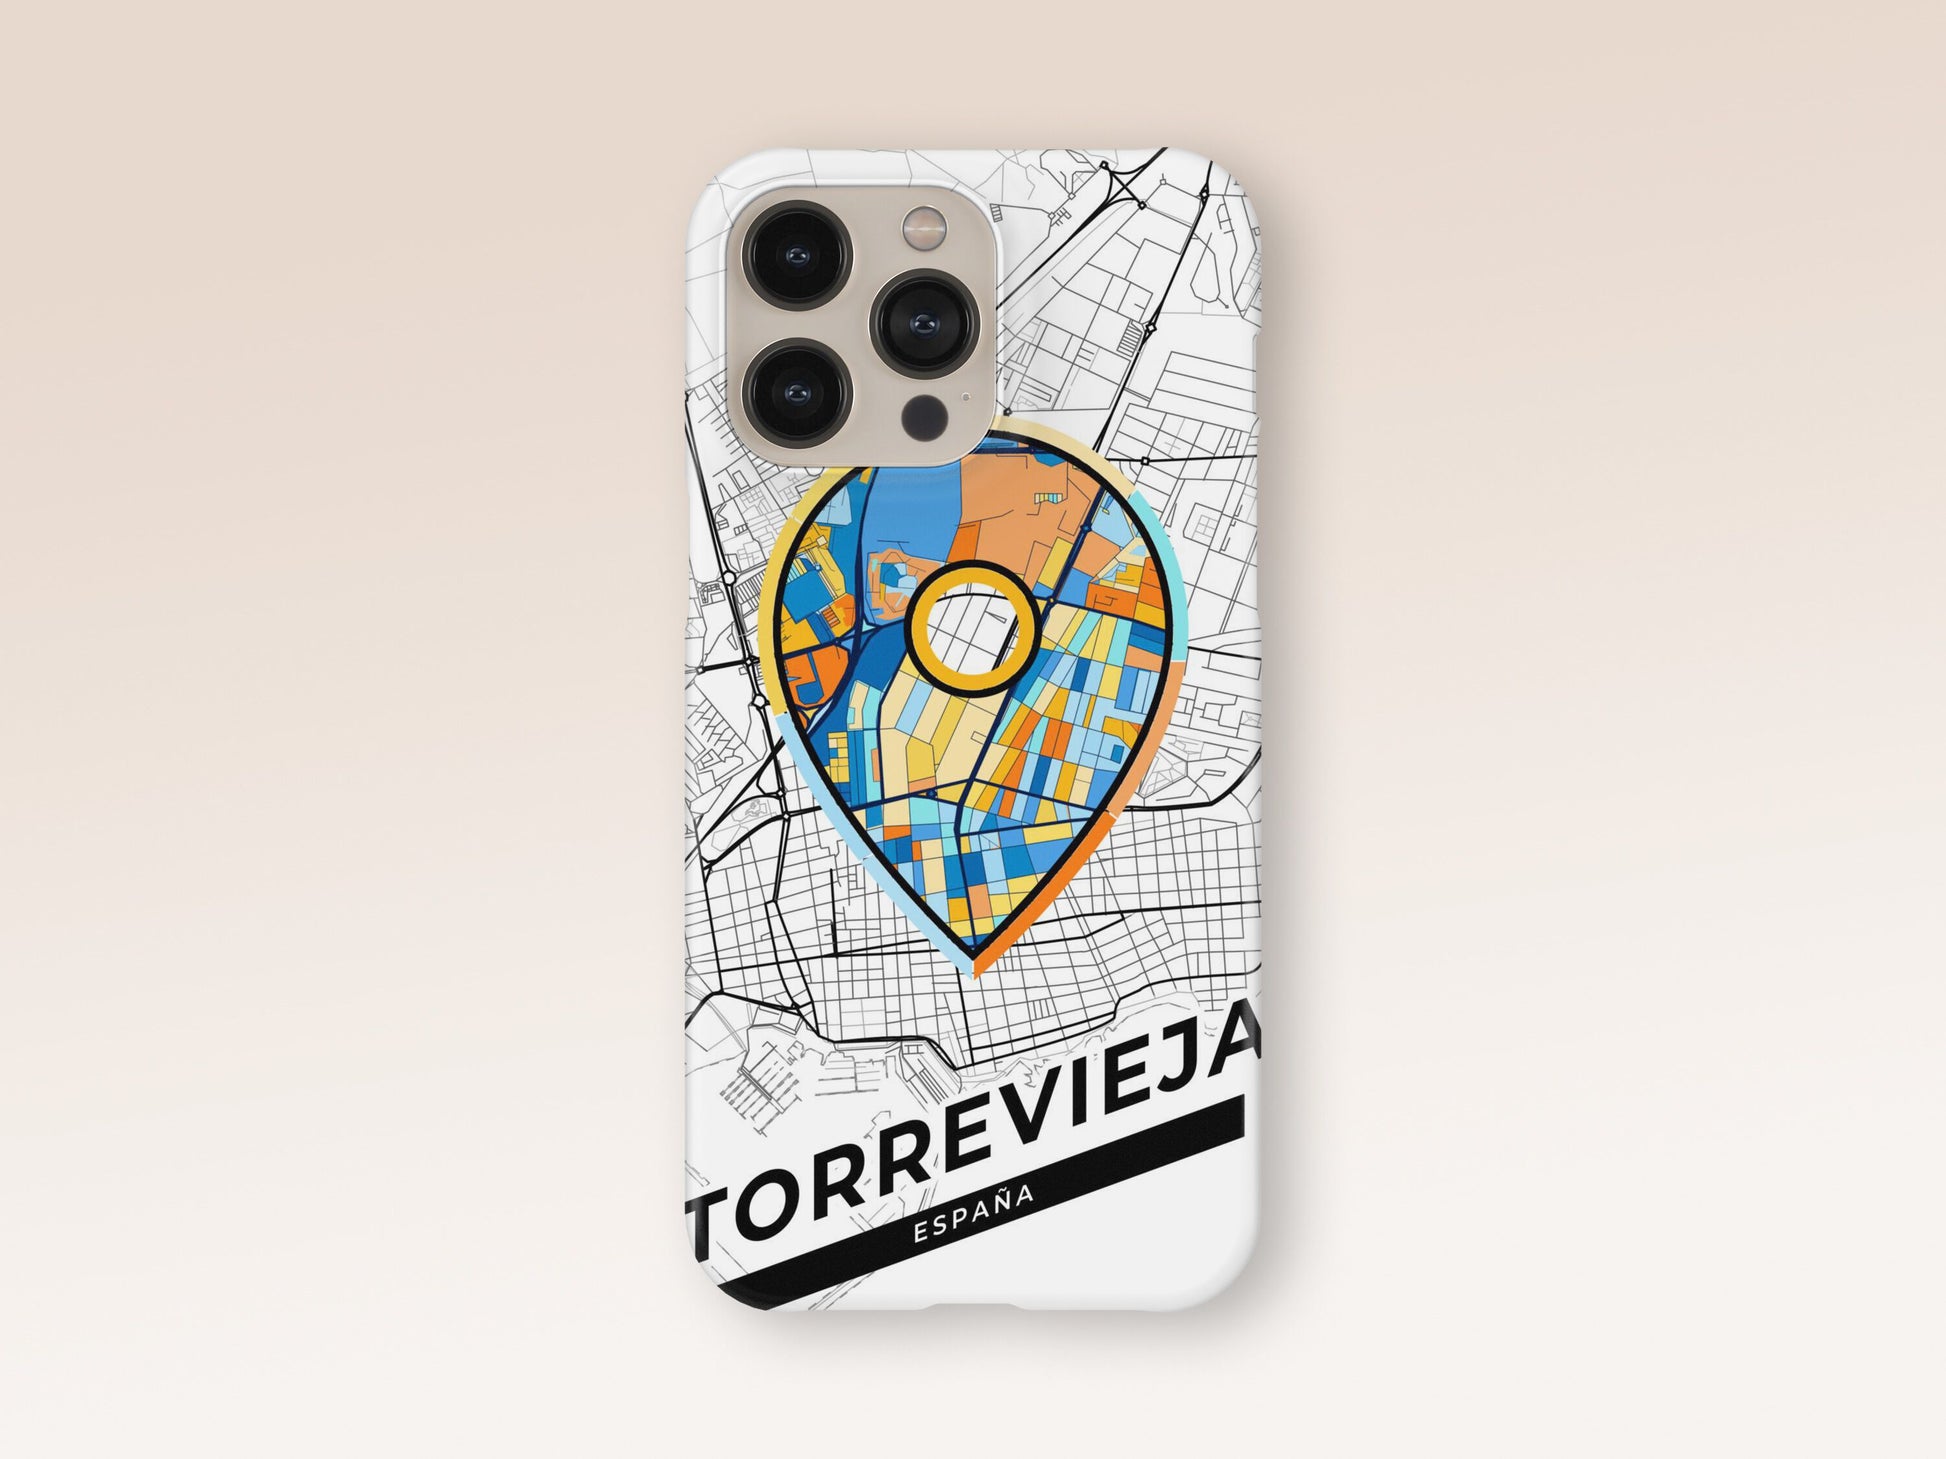 Torrevieja Spain slim phone case with colorful icon 1